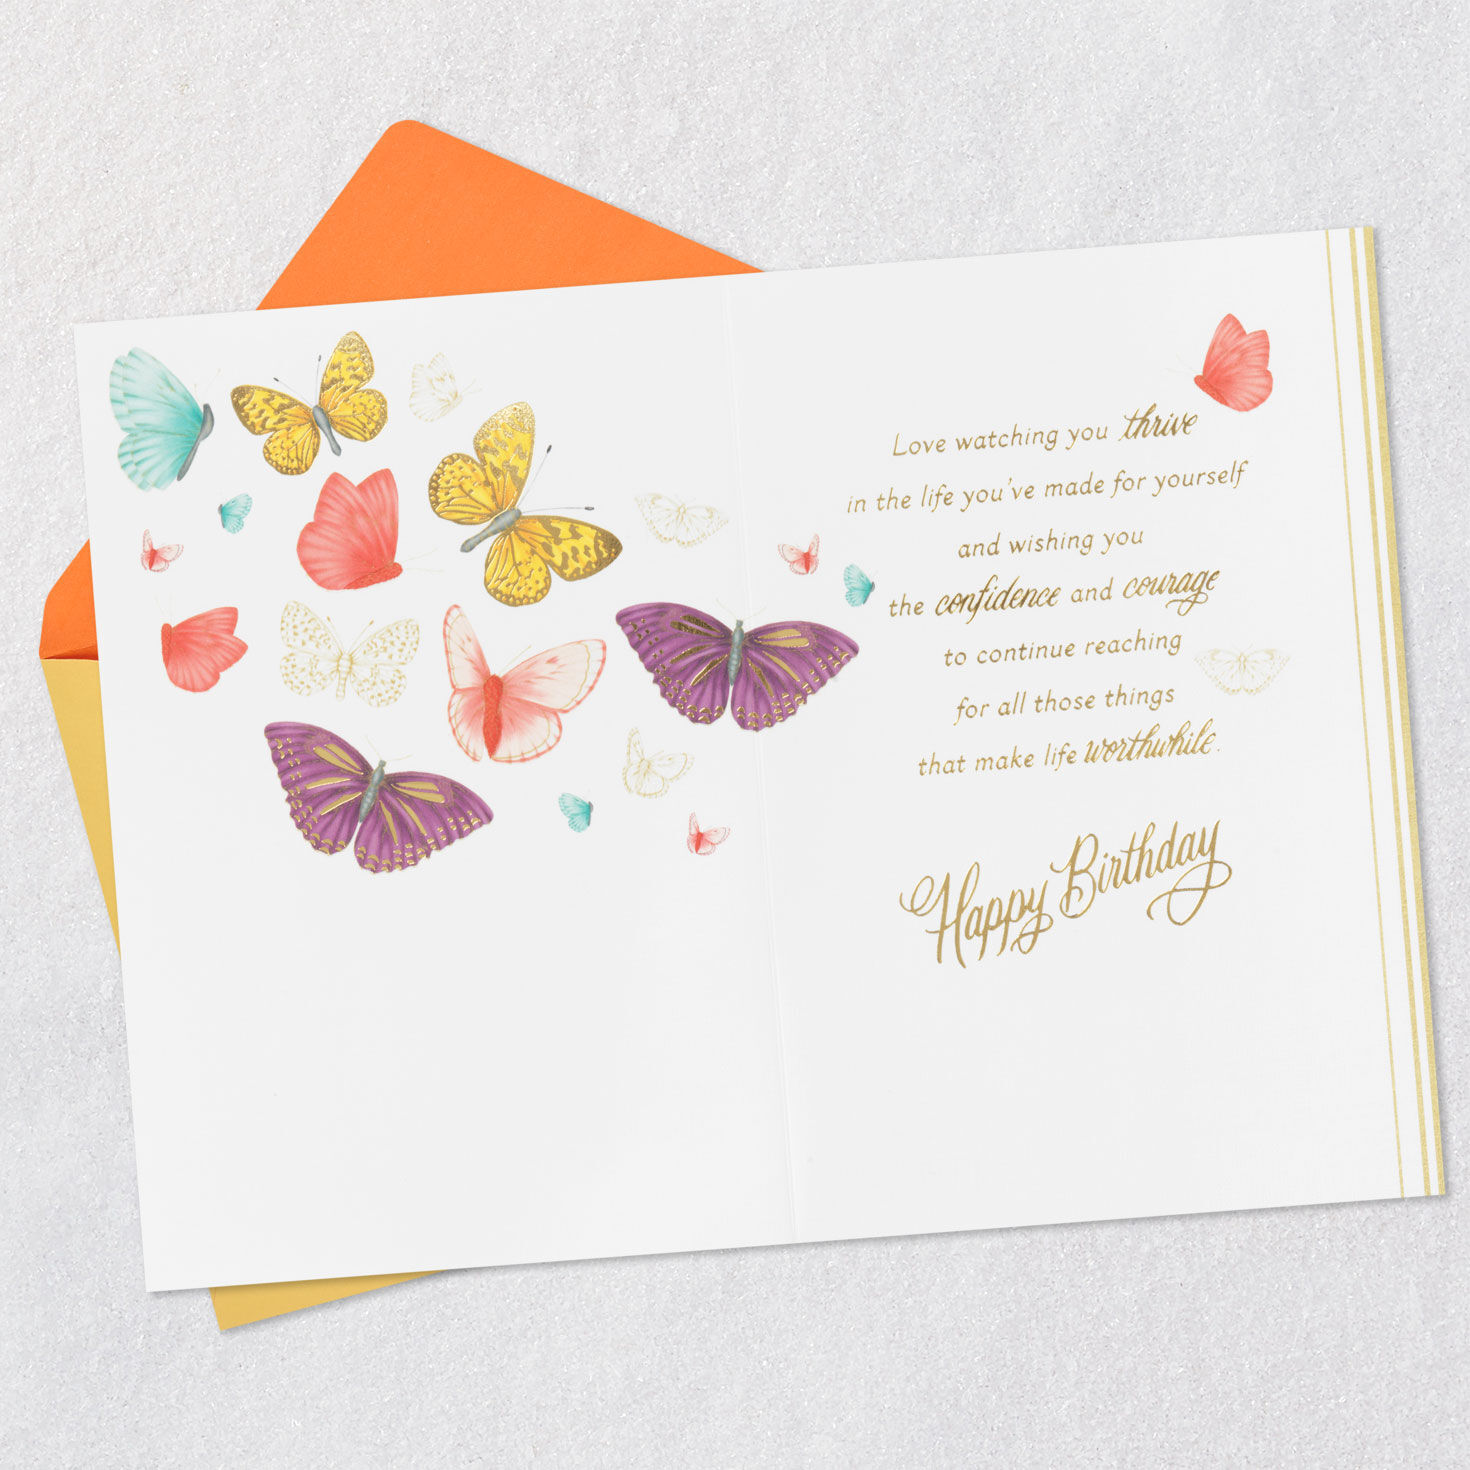 A Life That Makes You Truly Happy Birthday Card for Daughter for only USD 7.59 | Hallmark